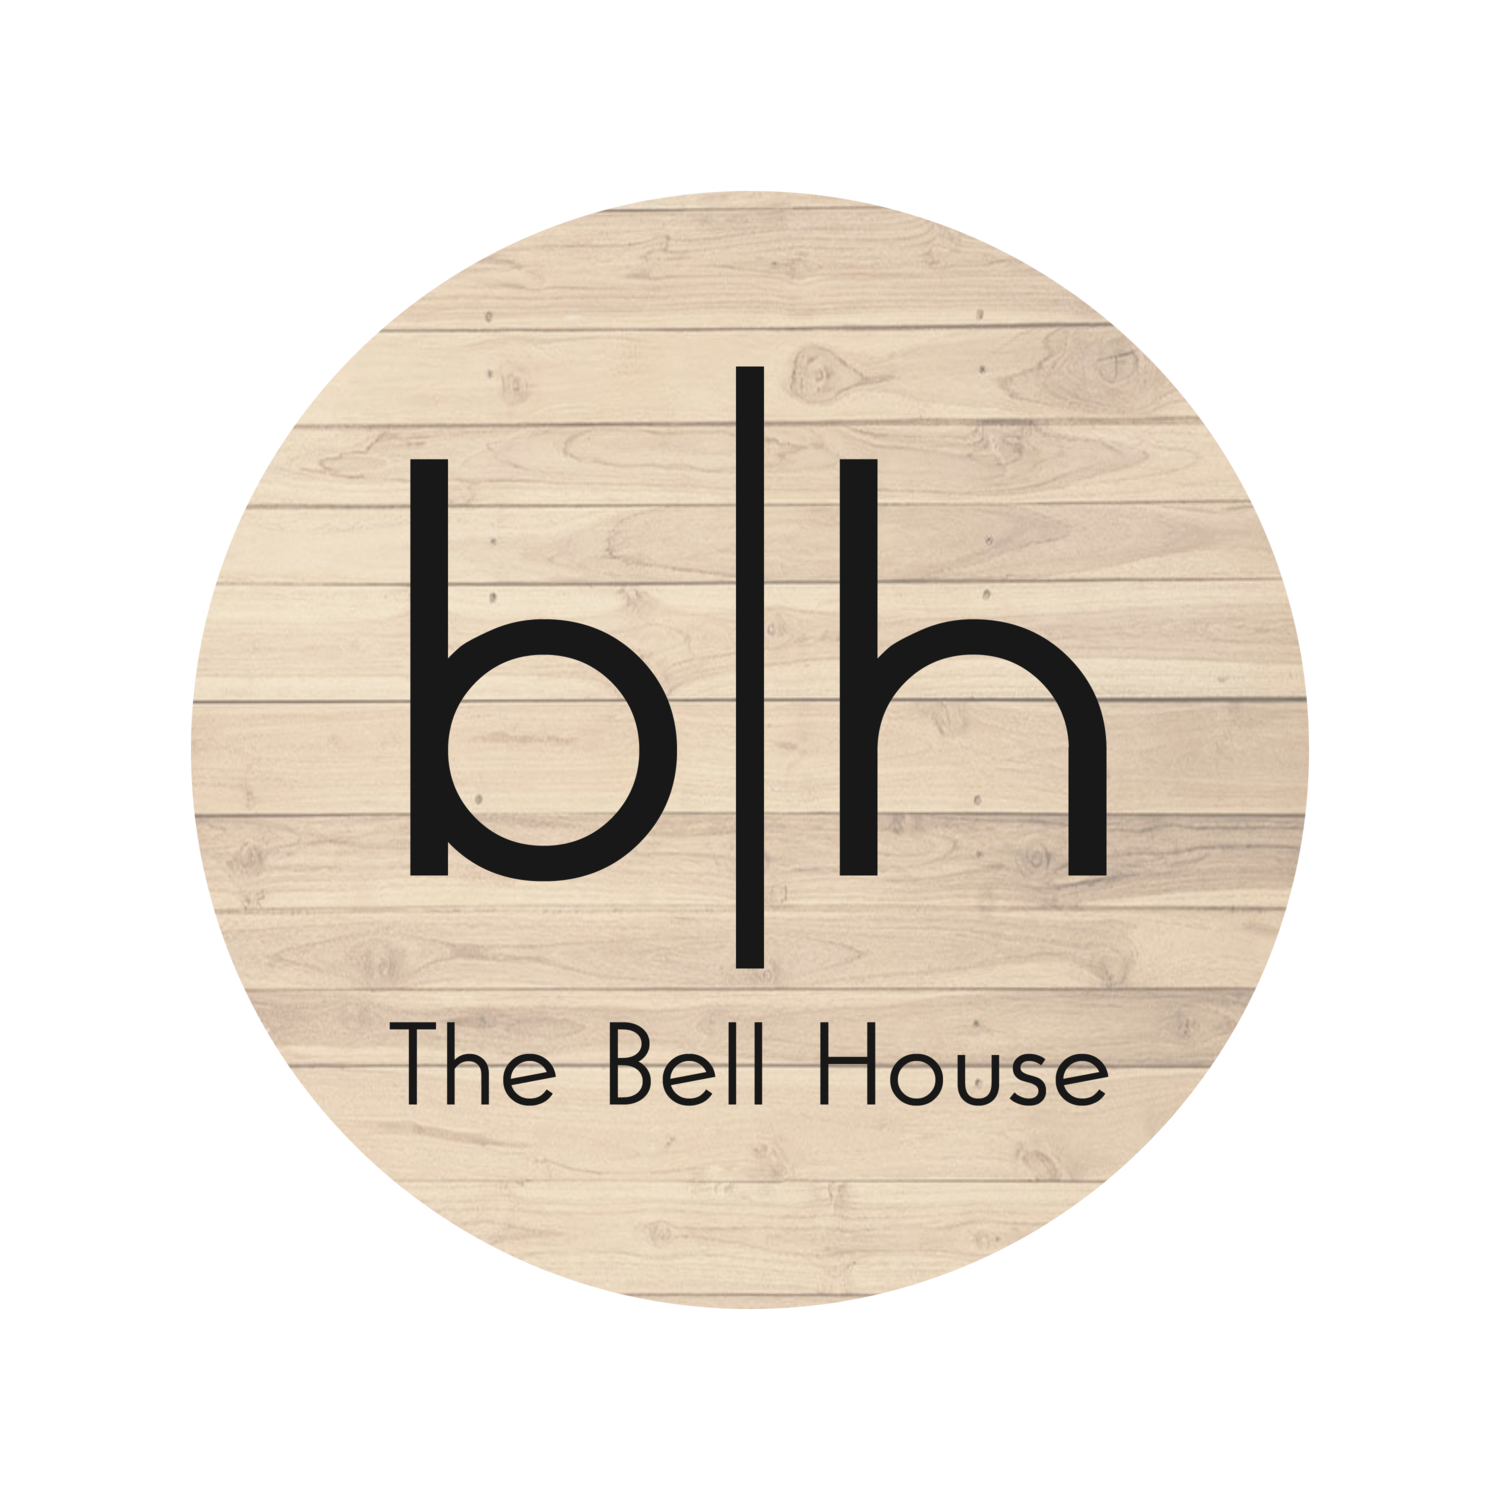 THE BELL HOUSE